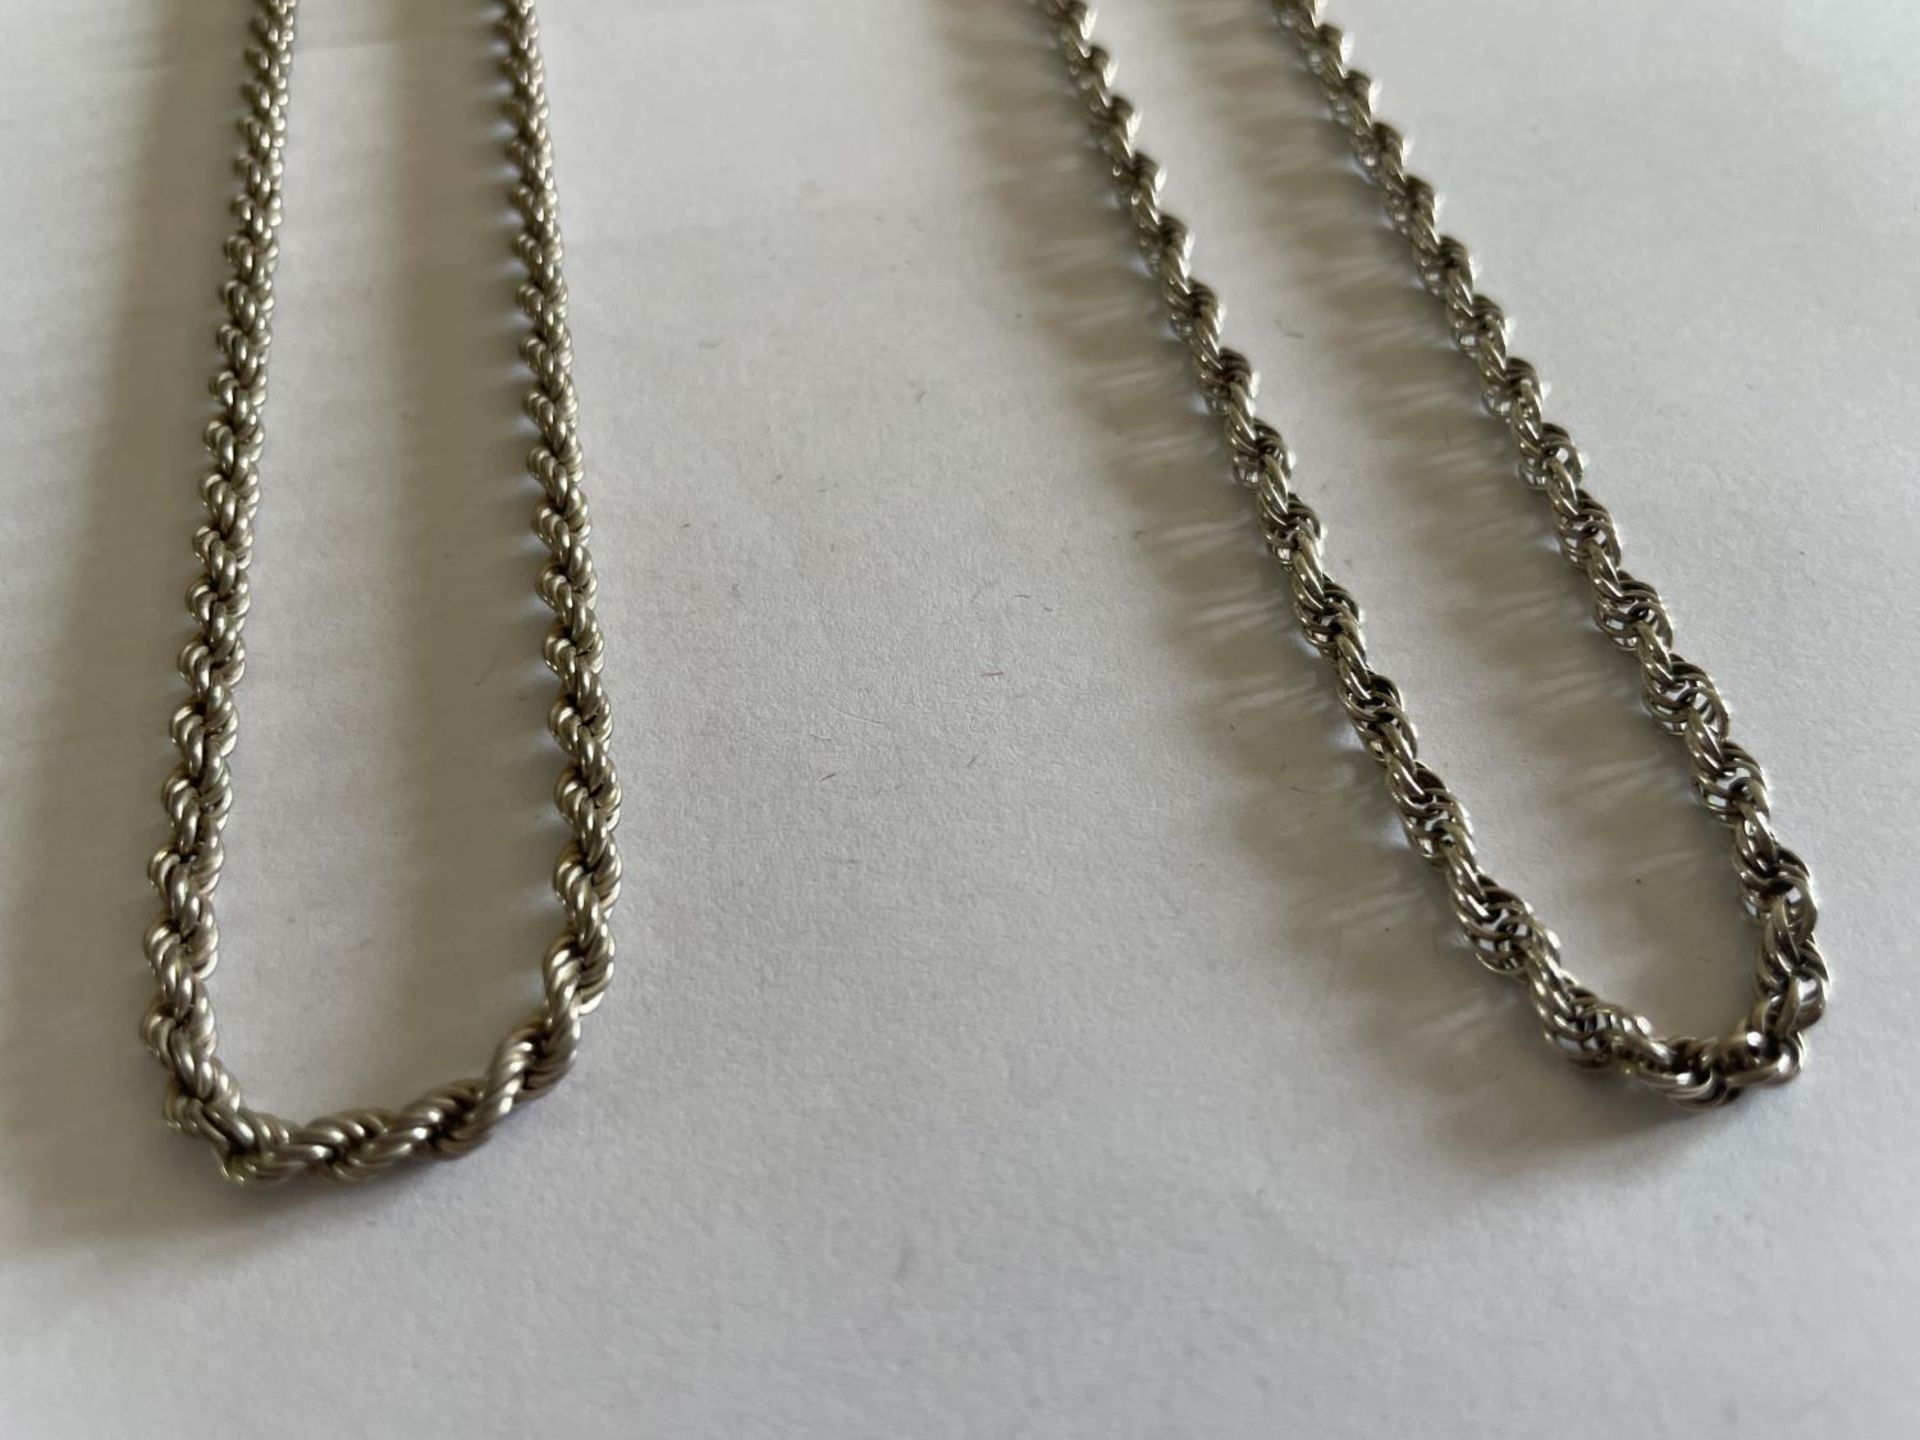 TWO SILVER ROPE NECKLACES - Image 2 of 2